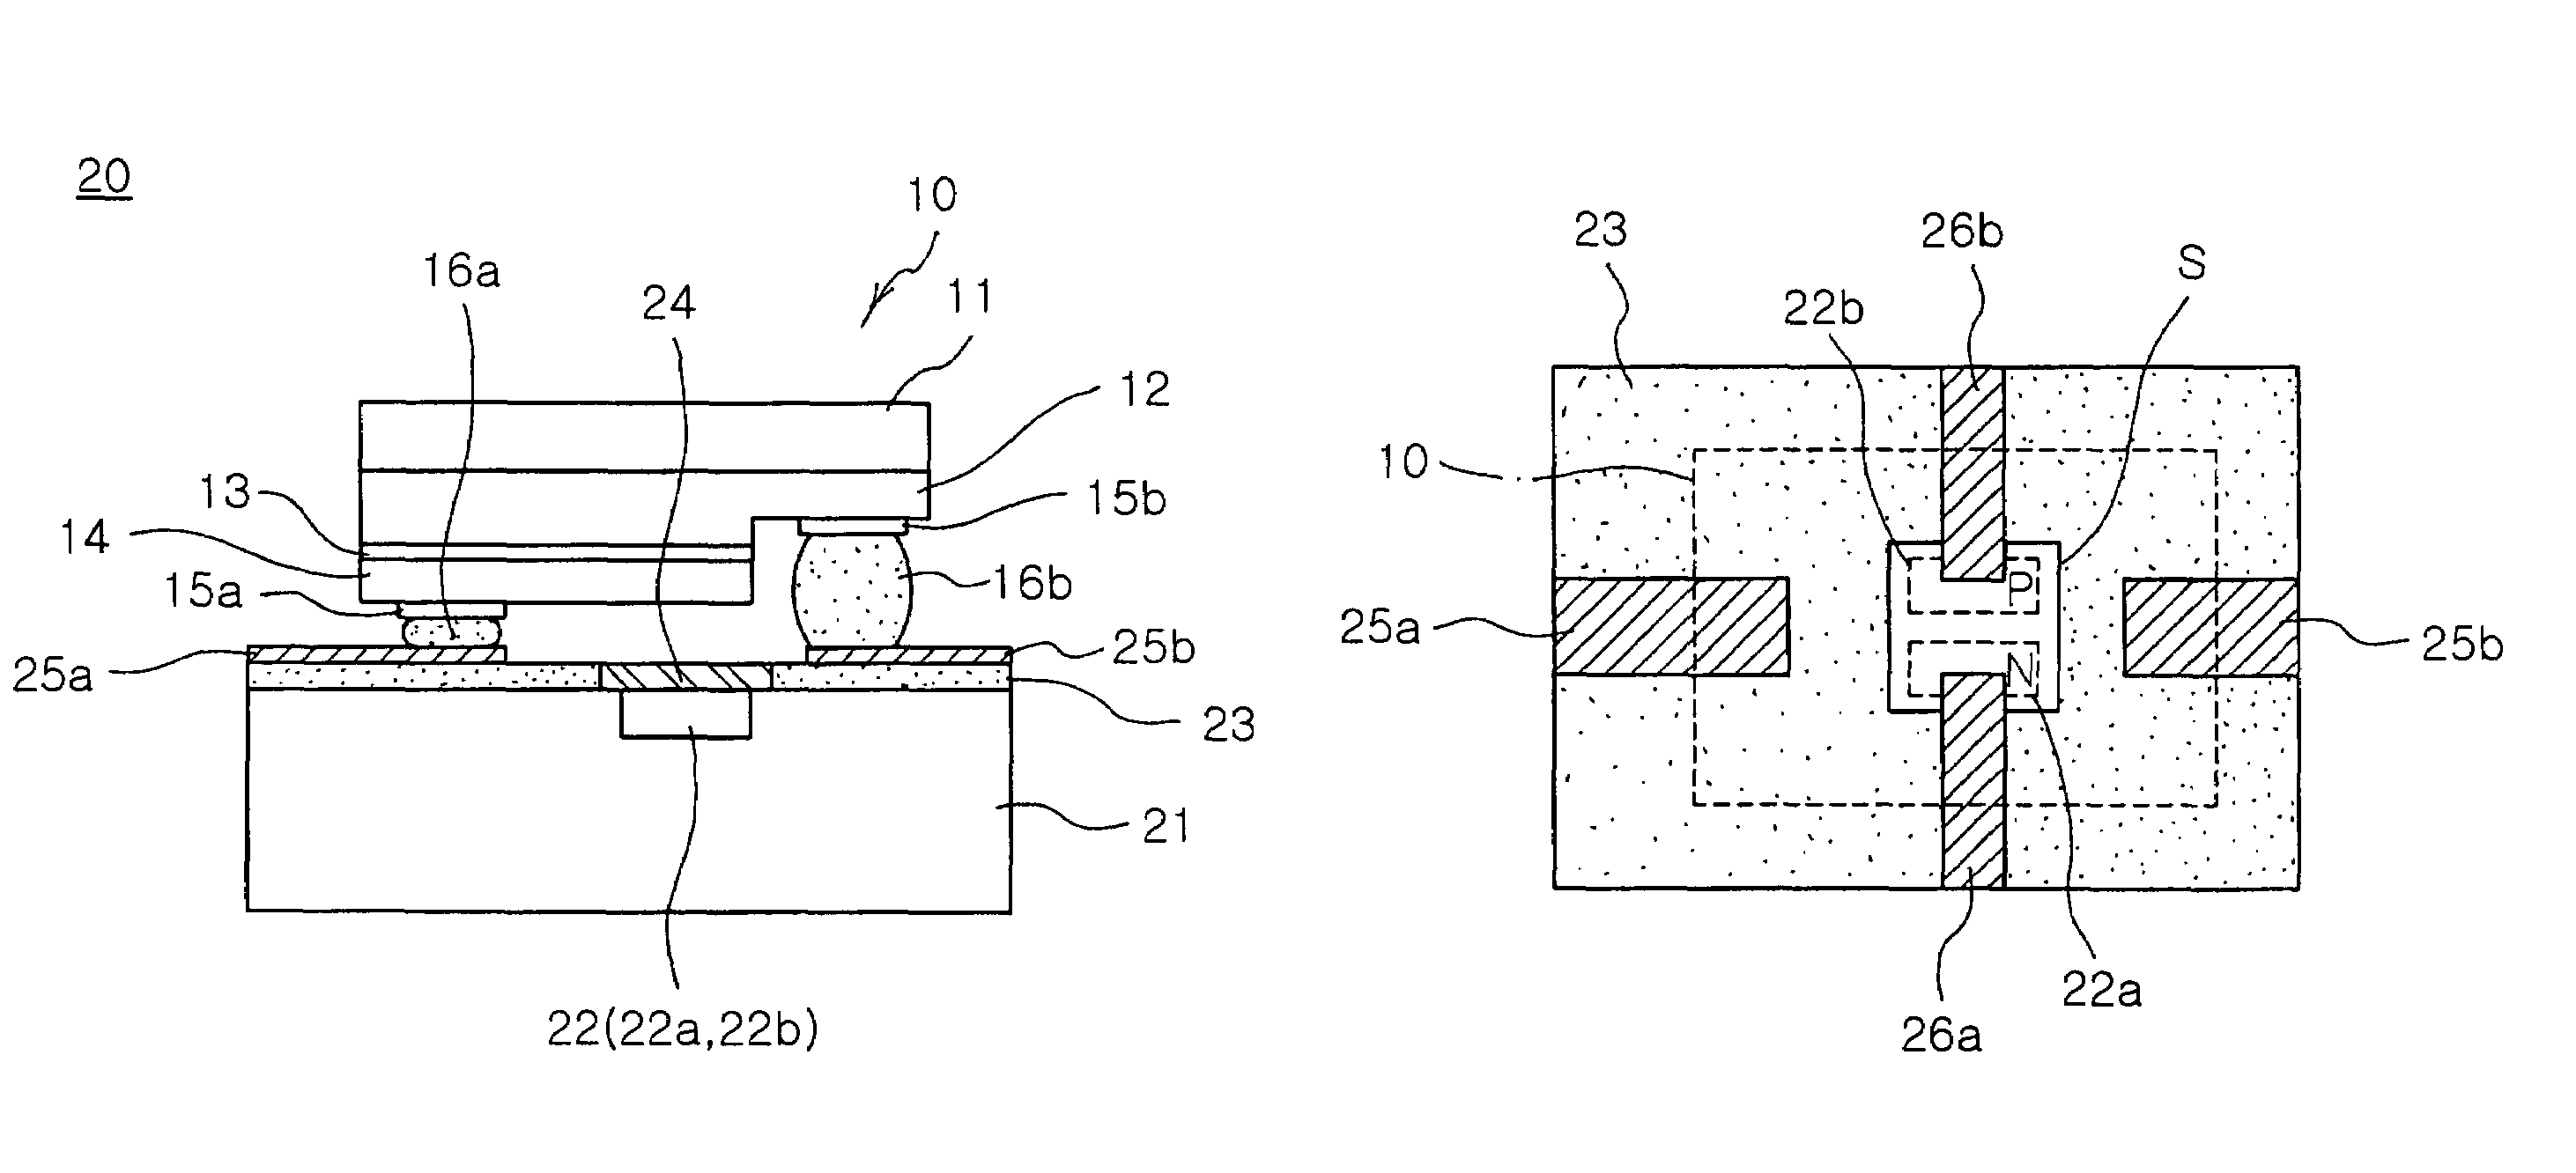 Light emitting diode package including monitoring photodiode